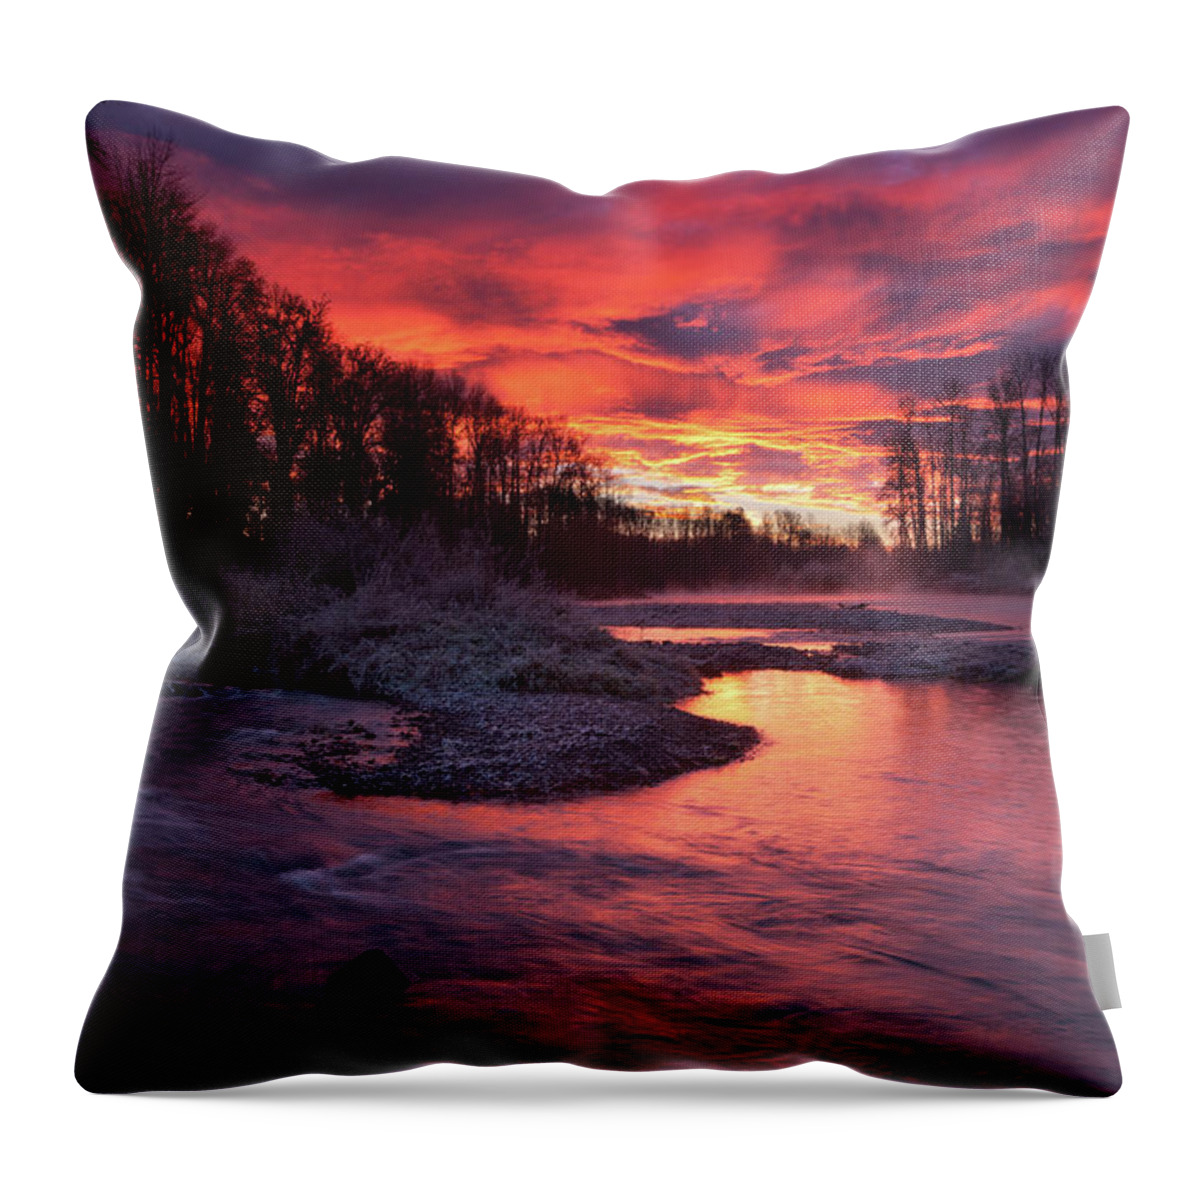 Colorful Throw Pillow featuring the photograph Sage Island Sunrise by Andrew Kumler